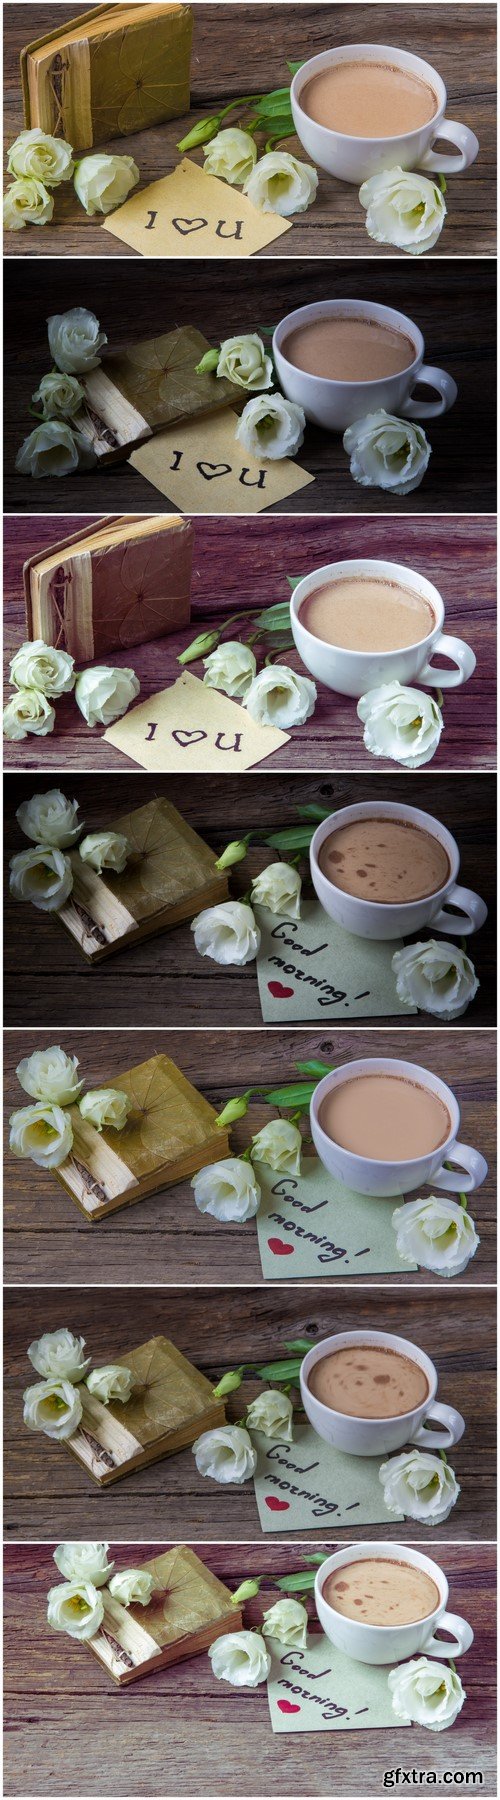 Coffee cup flower lisianthus and notes good morning on wooden background 7X JPEG